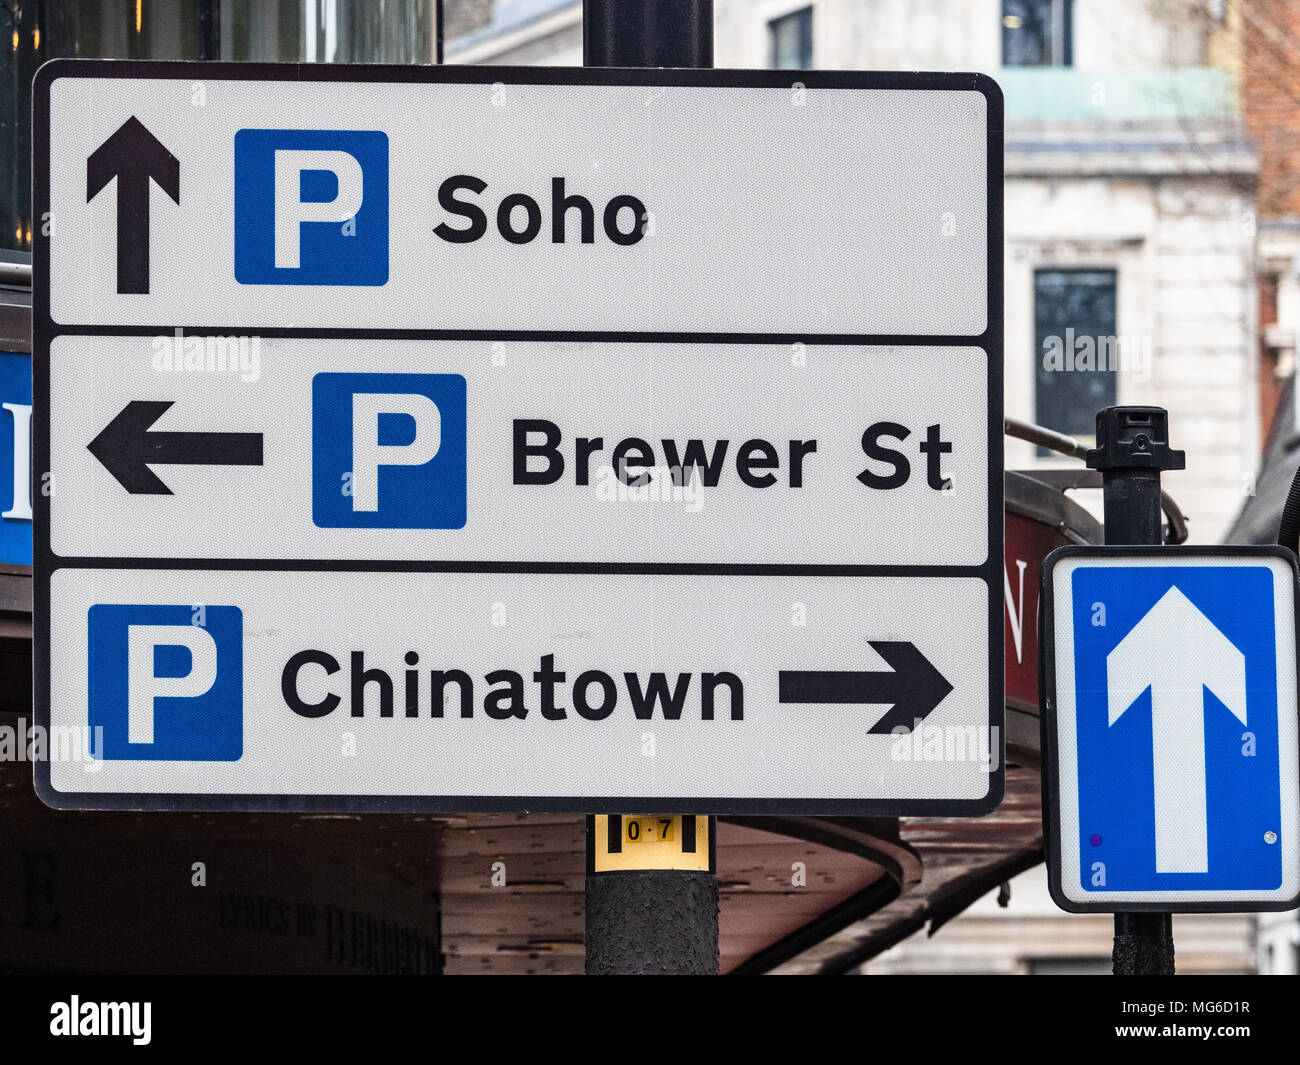 Central London Parking sign for Soho, Brewer Street and Chinatown car parks Stock Photo